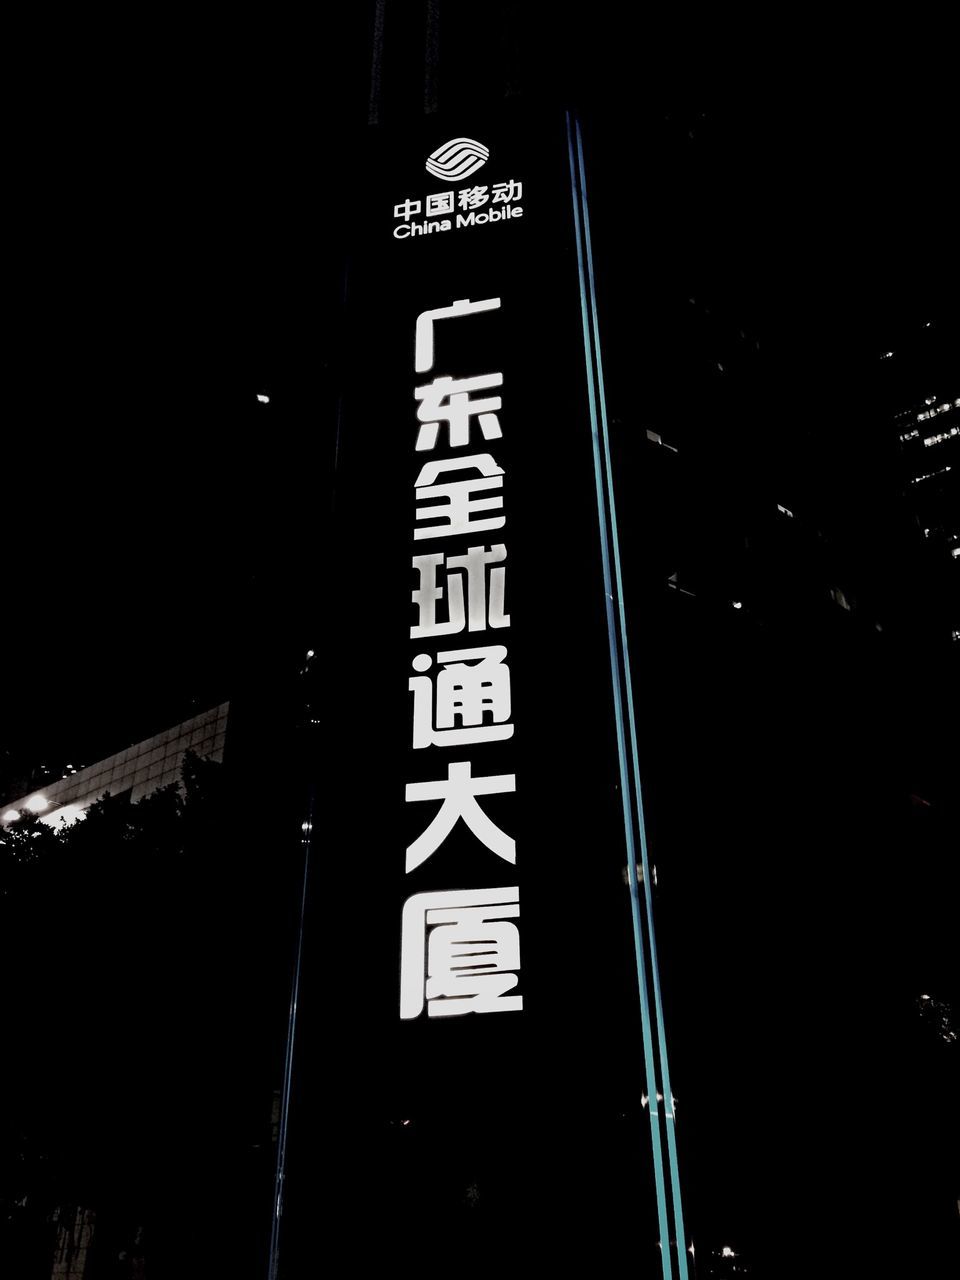 architecture, text, built structure, night, communication, low angle view, illuminated, building exterior, western script, sign, information sign, guidance, clear sky, information, capital letter, arrow symbol, directional sign, building, no people, dark